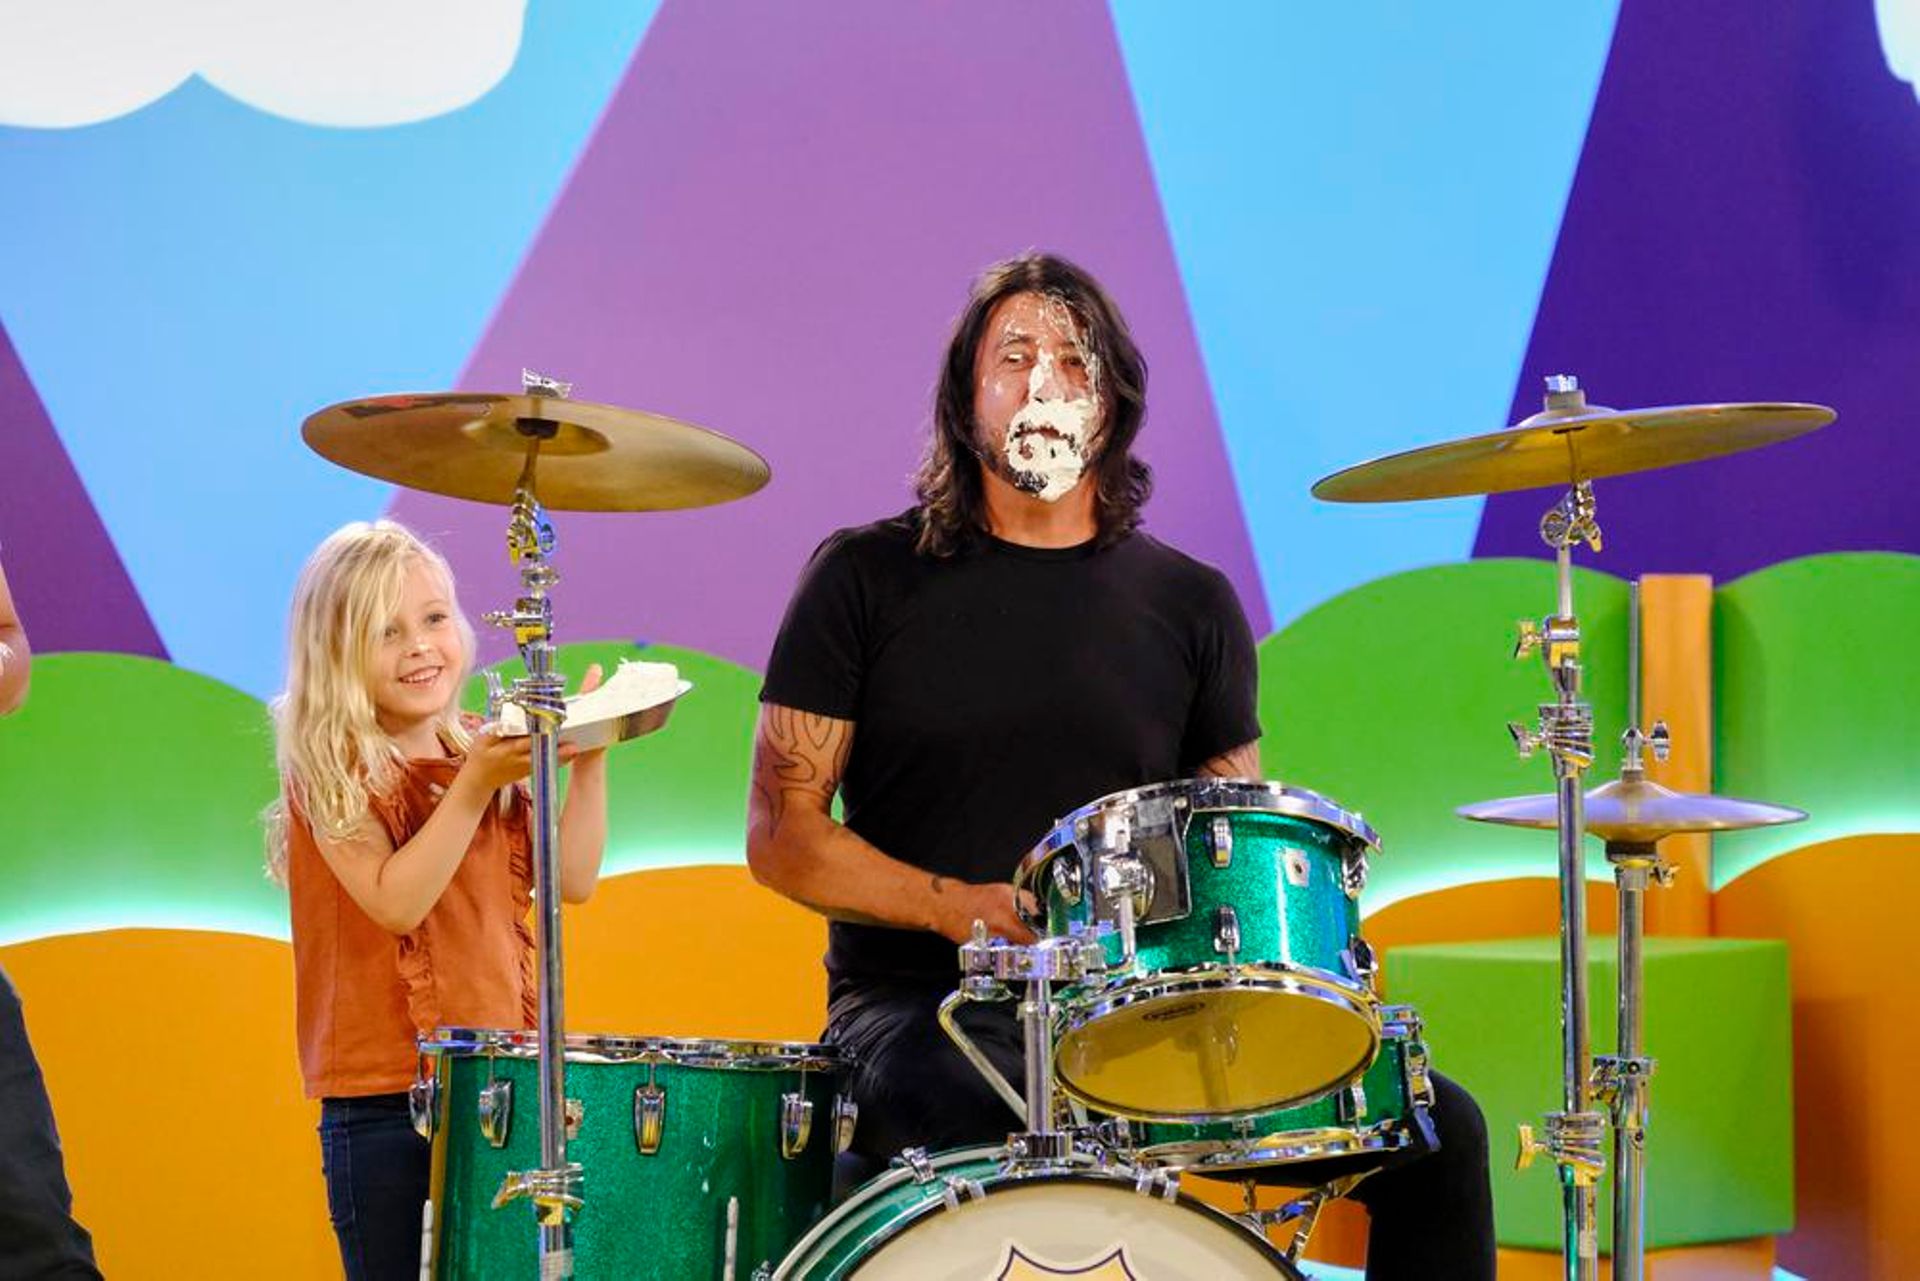 [Zapping 21] Dave Grohl, star des enfants